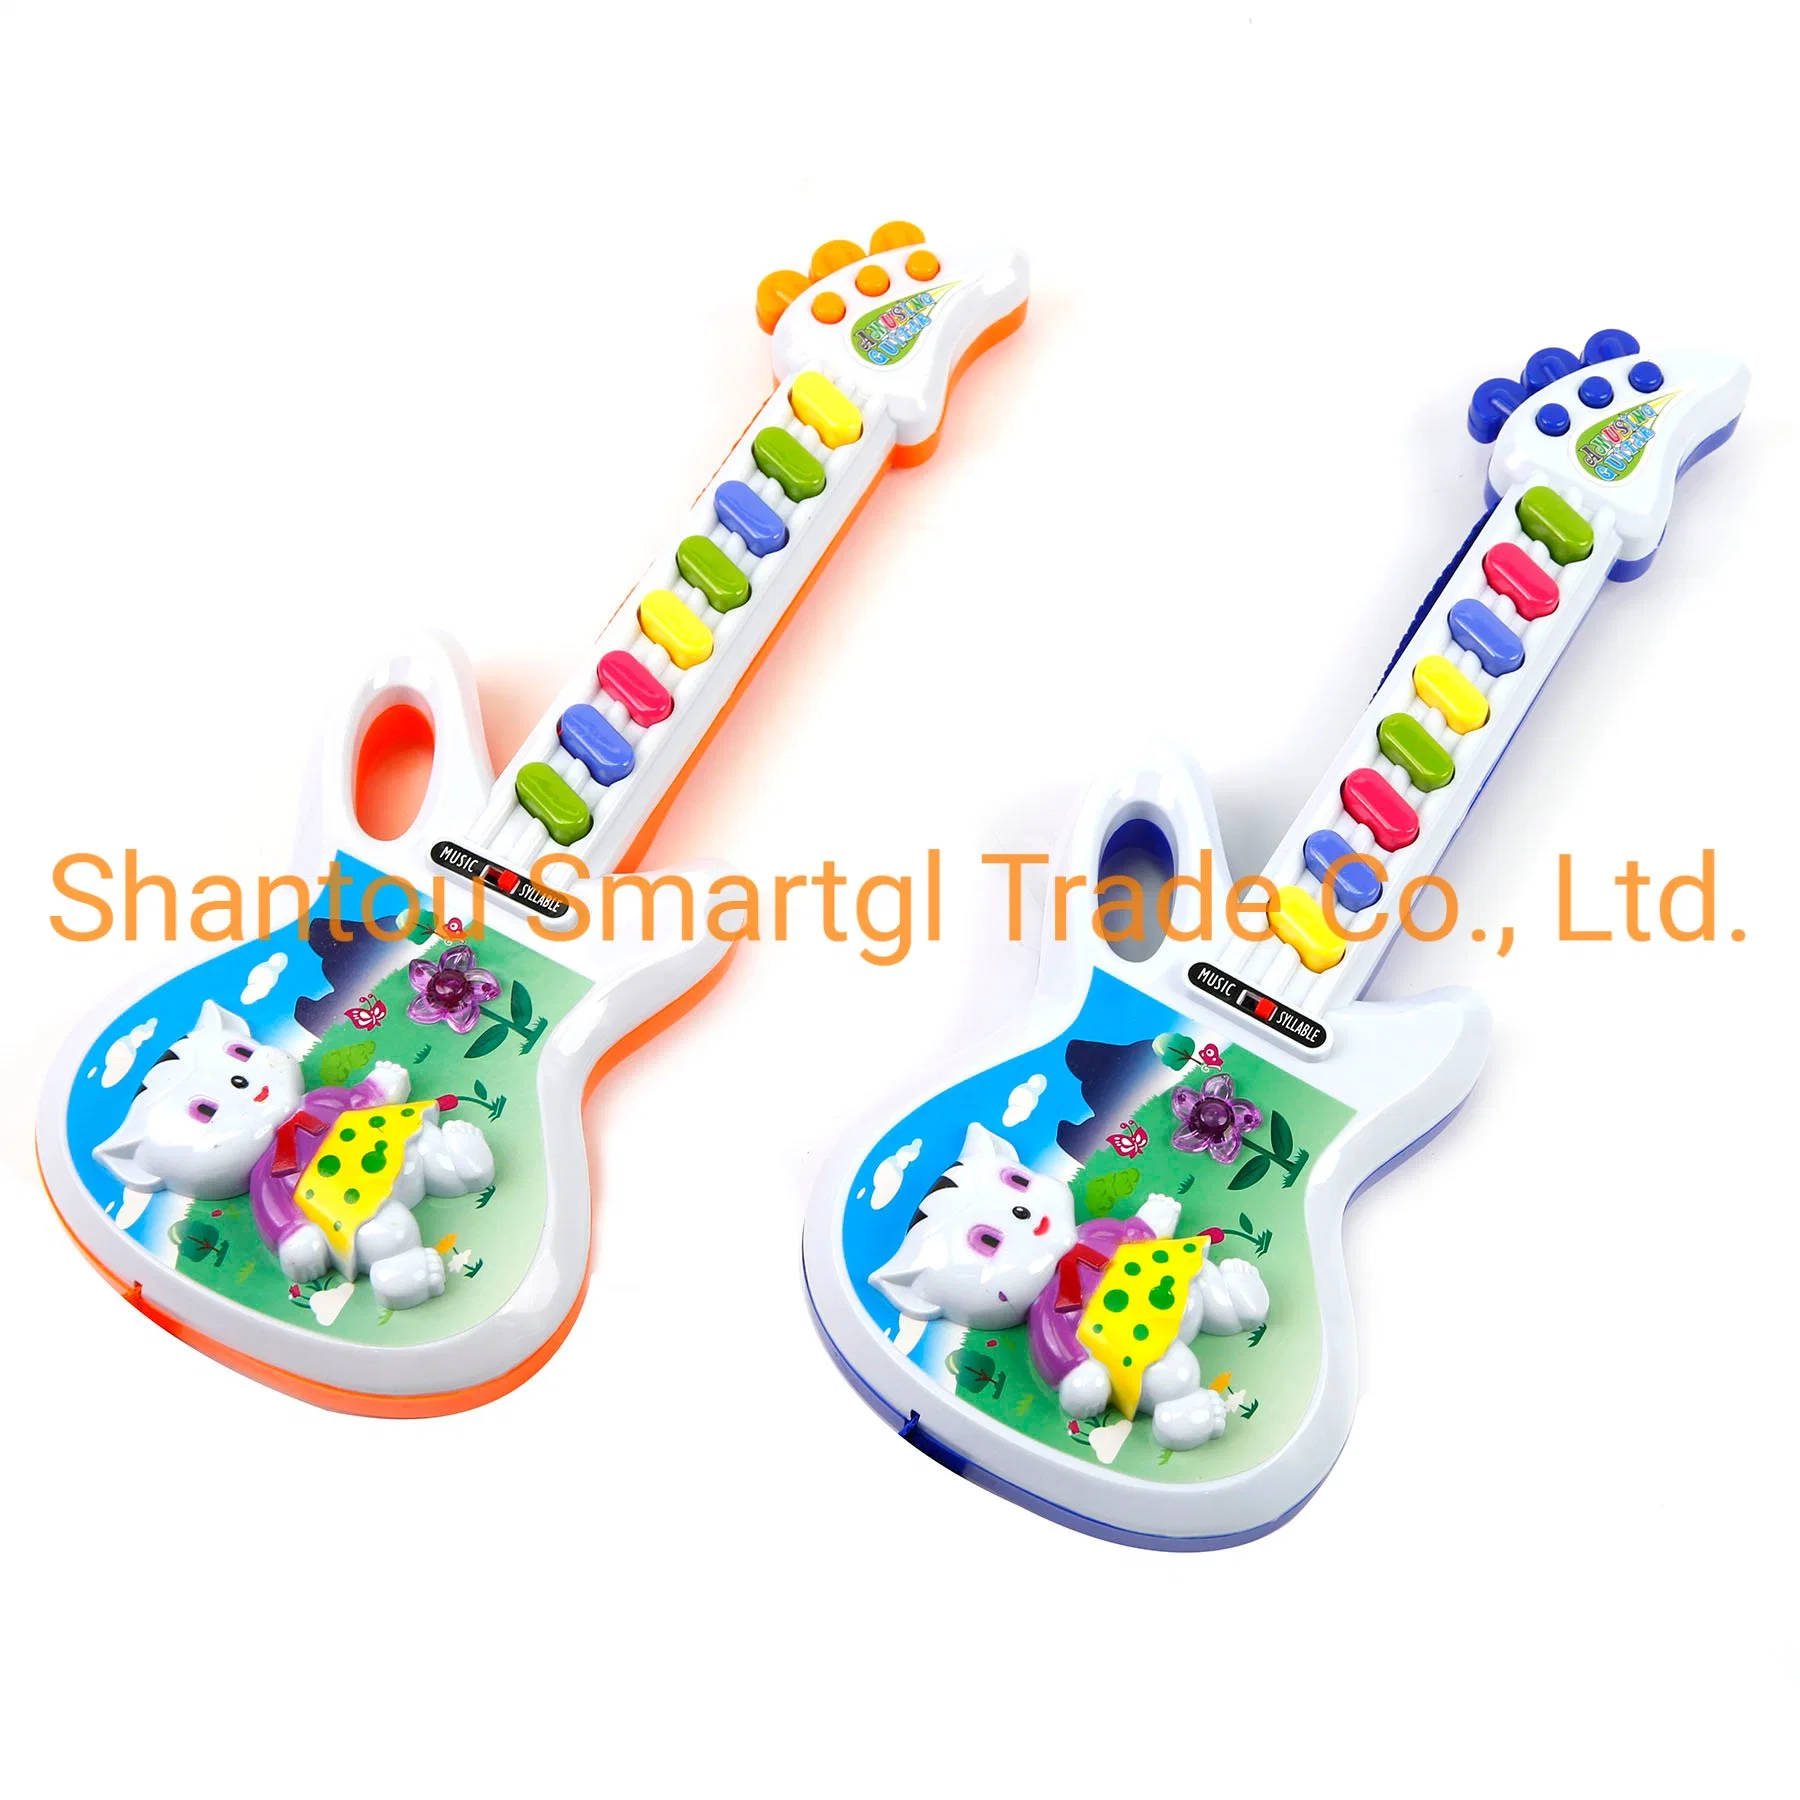 Electronic Toy Guitar